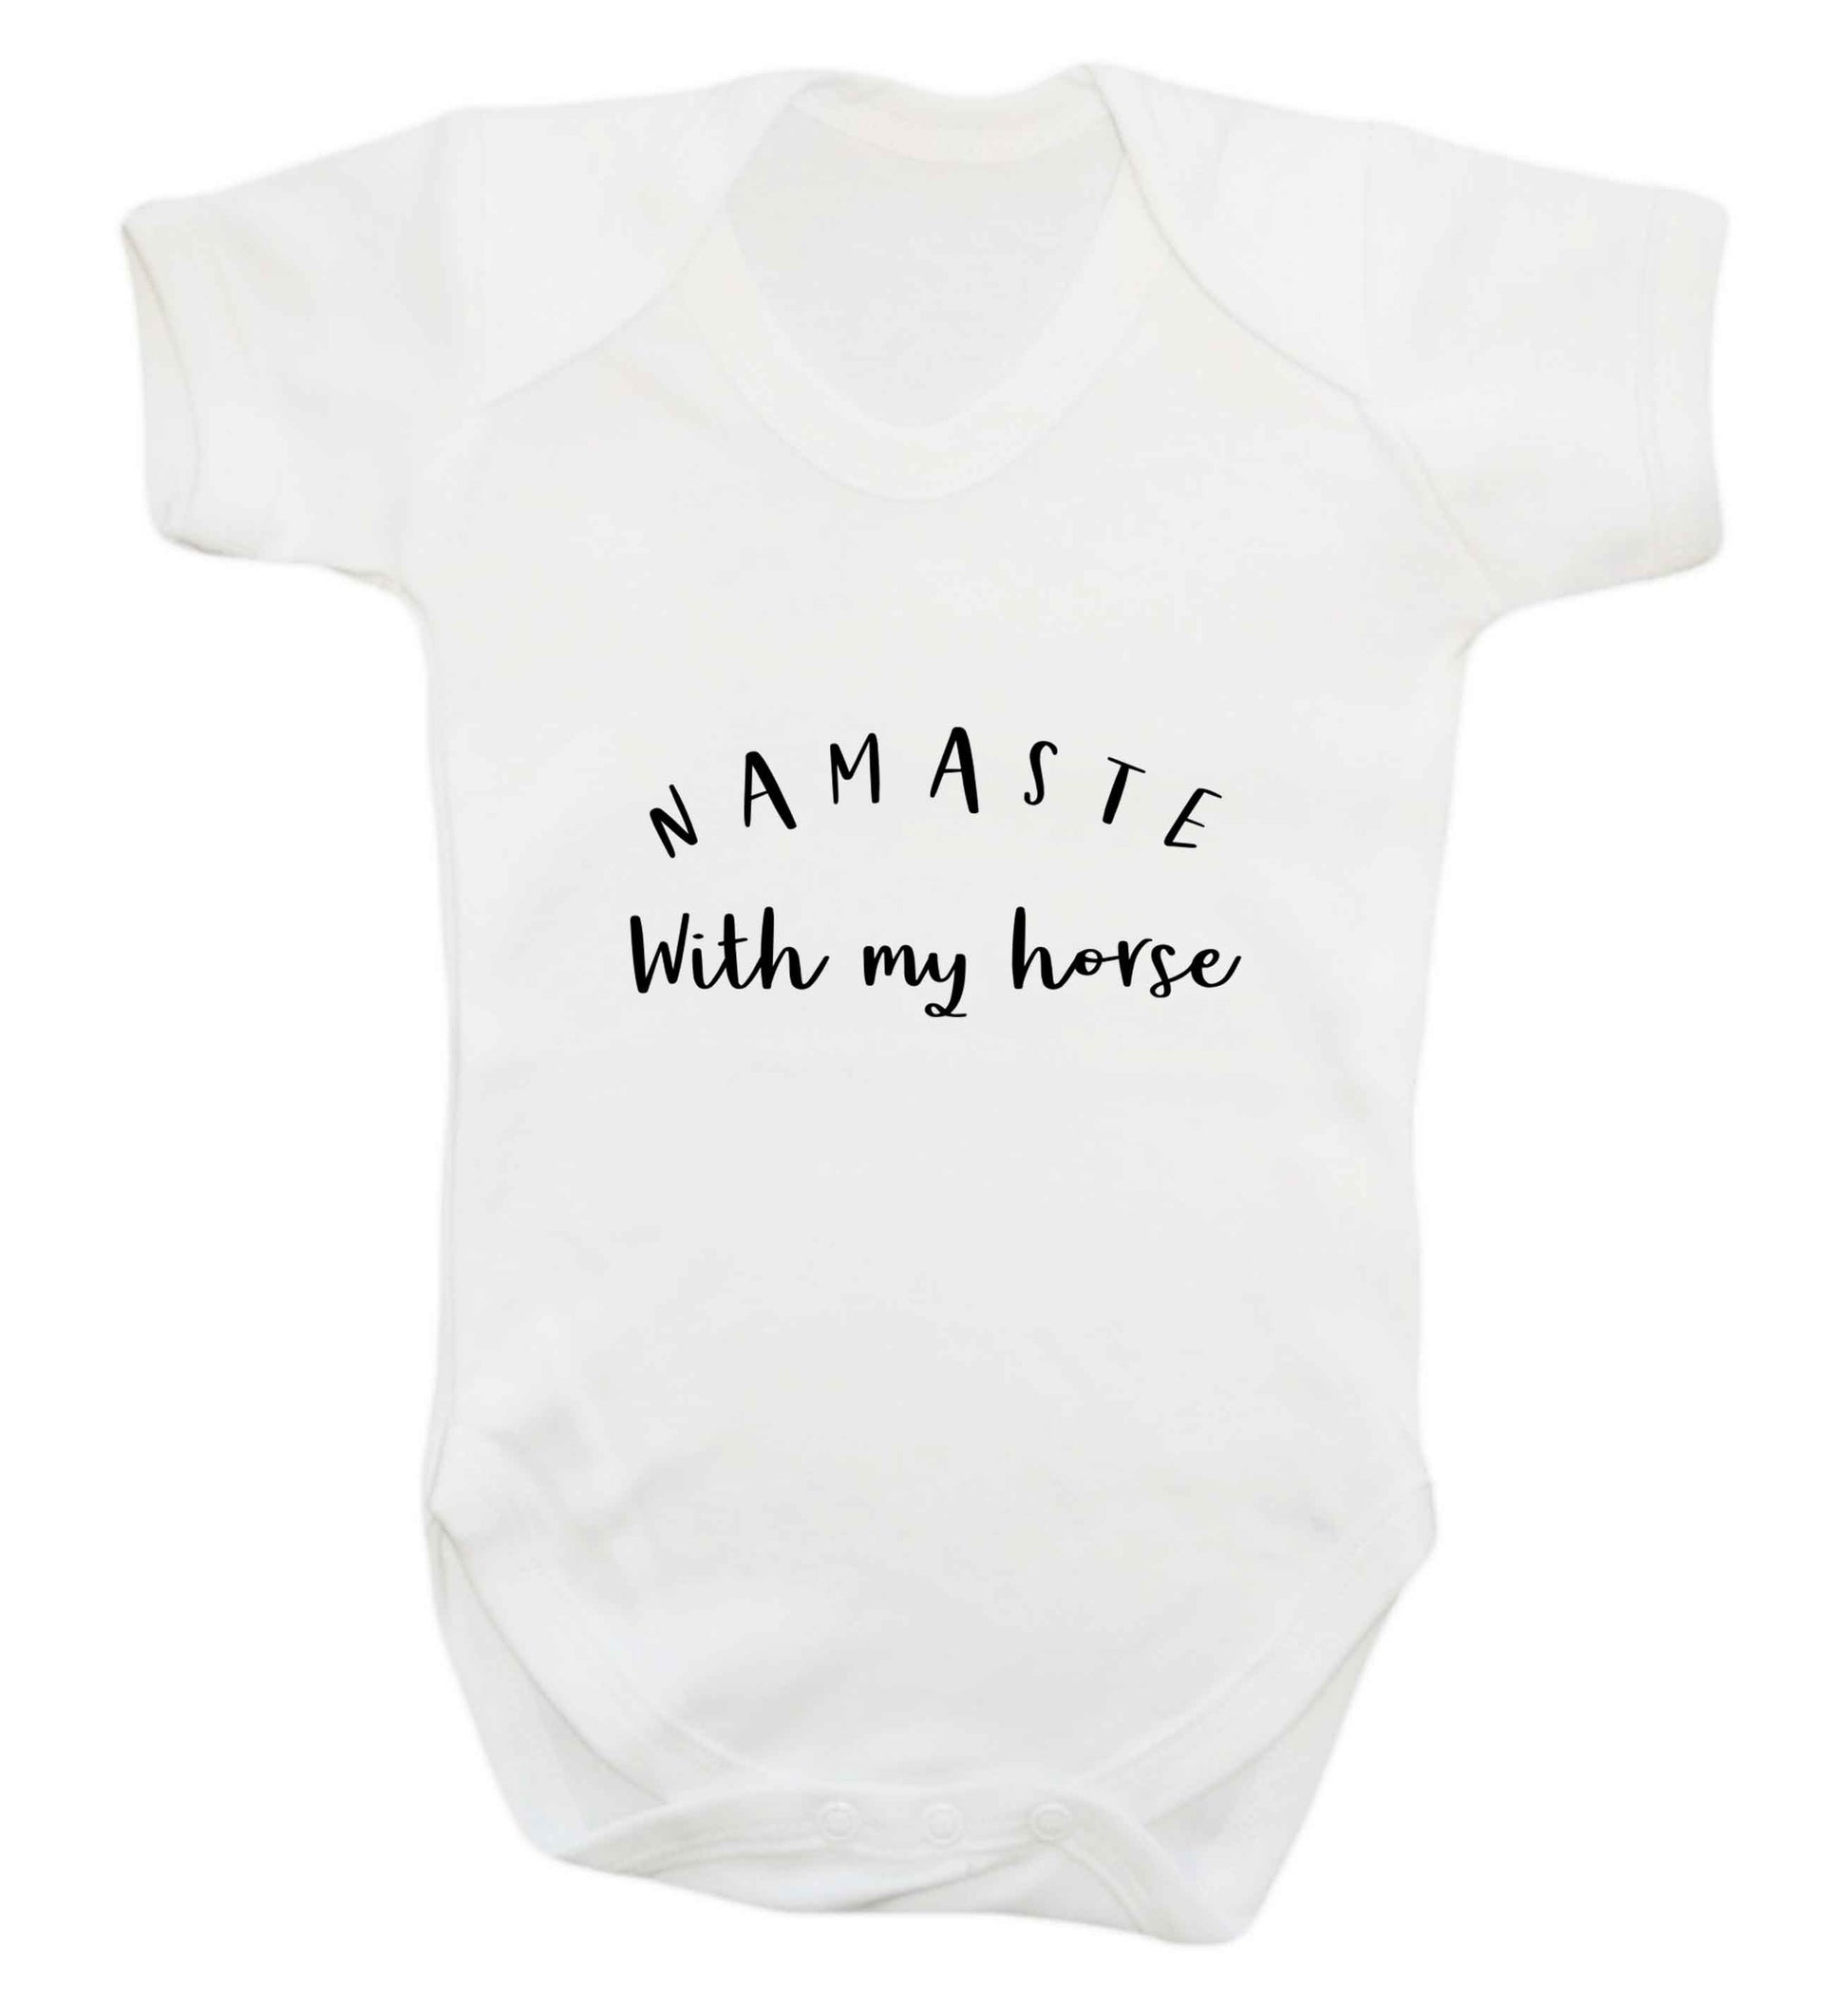 Namaste with my horse baby vest white 18-24 months